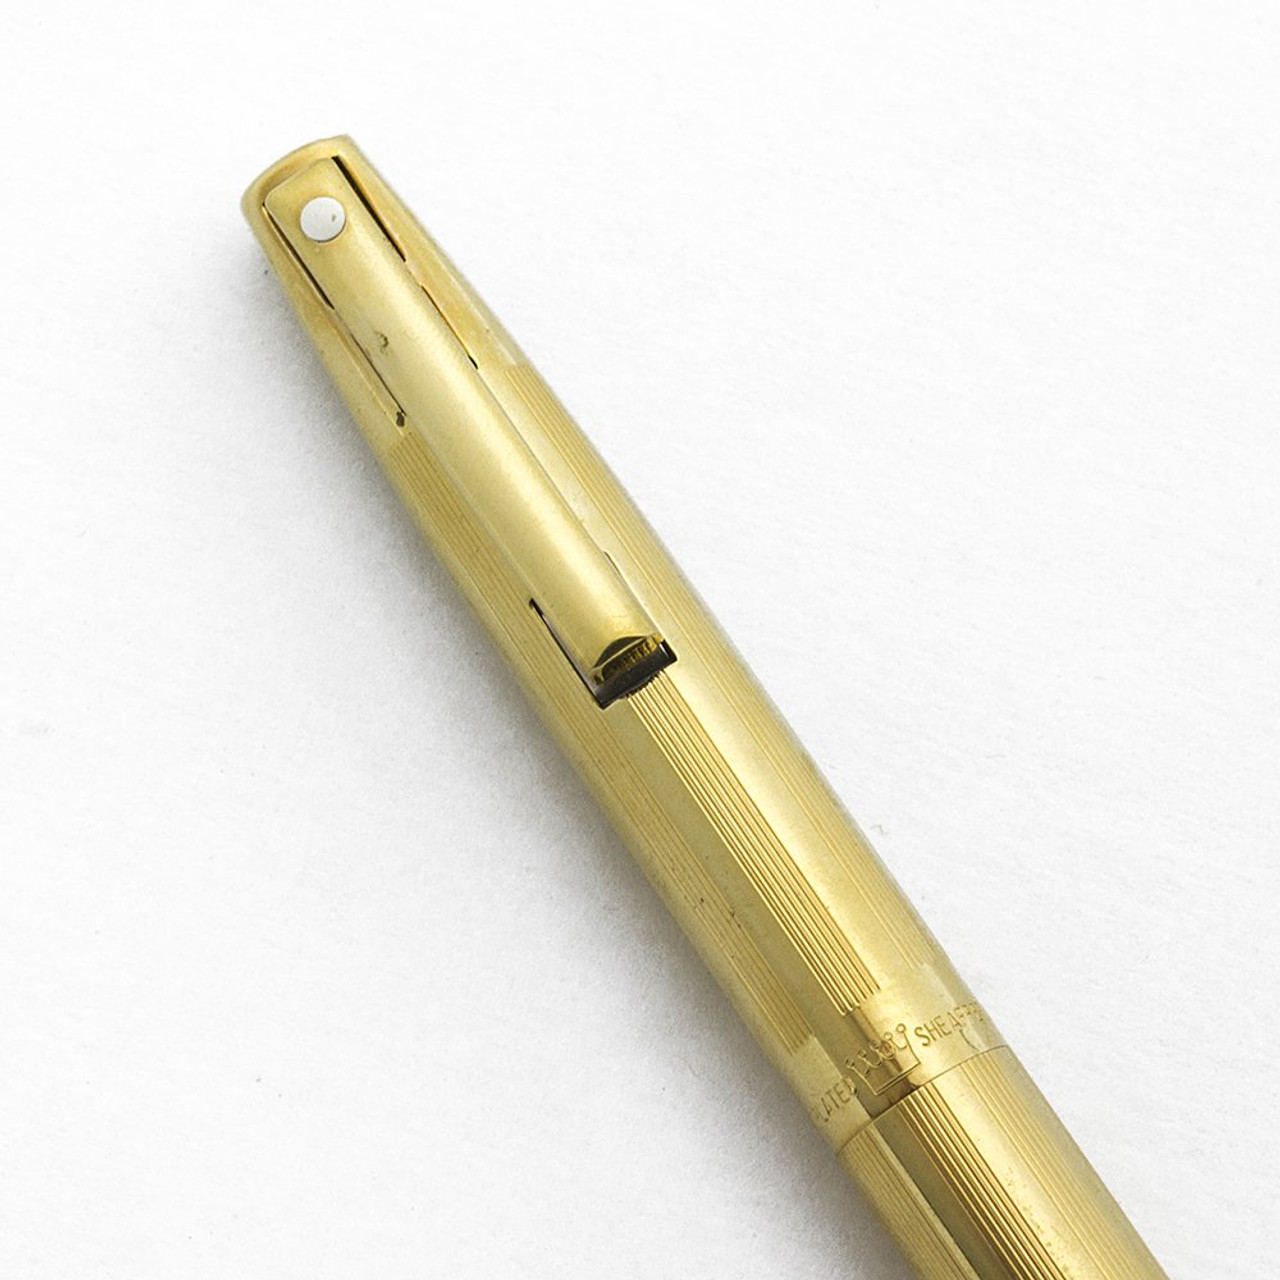 Sheaffer Imperial Ballpoint Pen - Gold Plated Grouped Lines (Very Nice, Works Well)